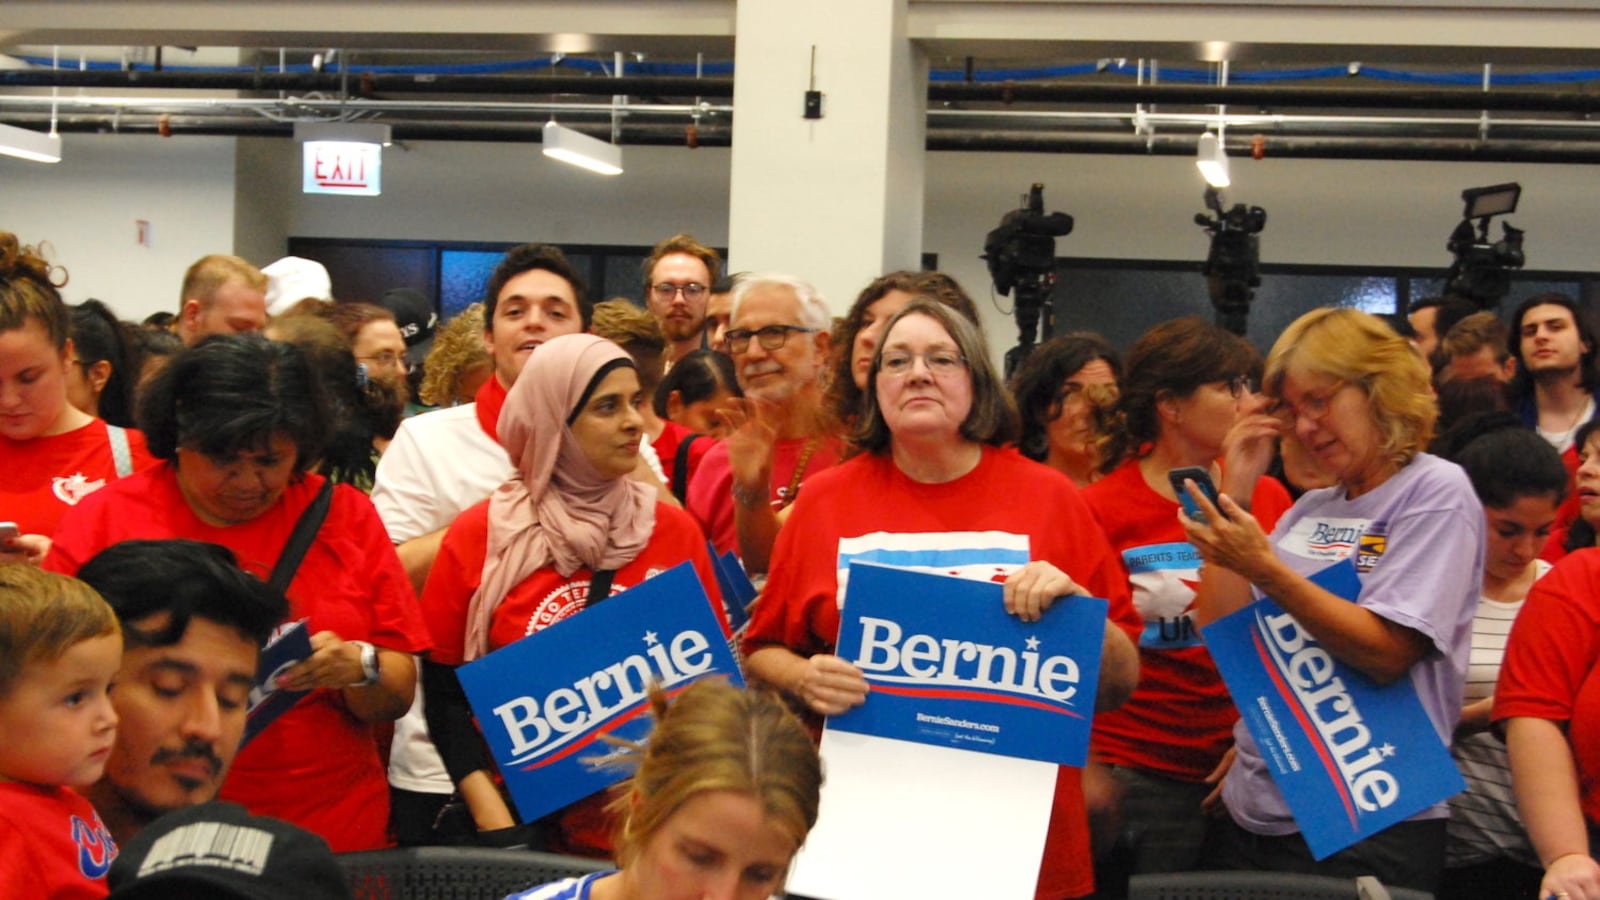 Hundreds of teachers, school support staff and other union members gathered Tuesday night to see Sen. Bernie Sanders speak at a union rally.